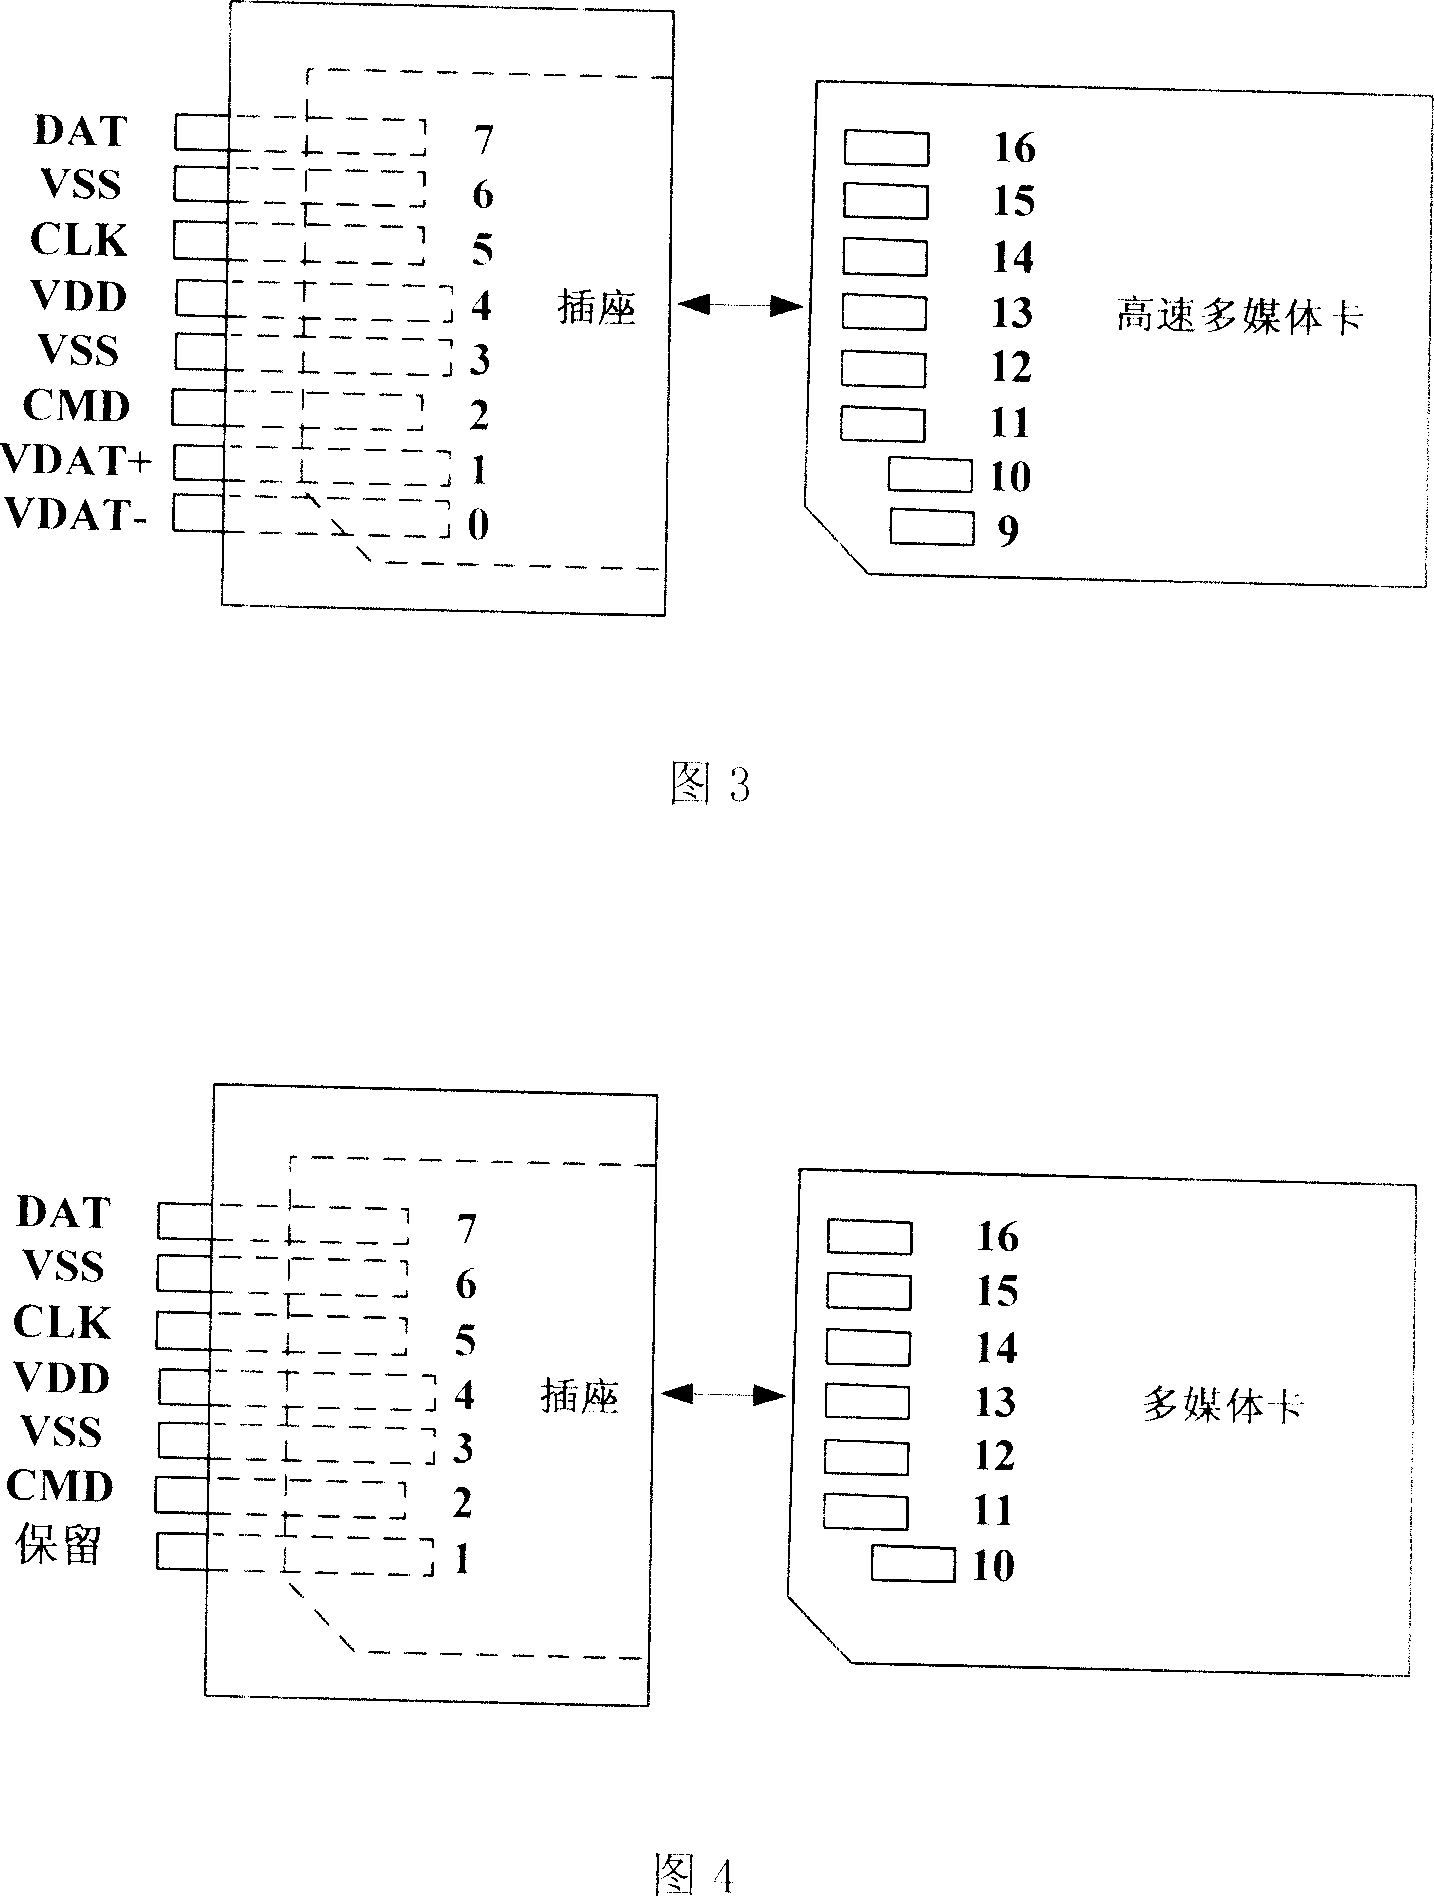 Method for promoting transmission speed of memory card